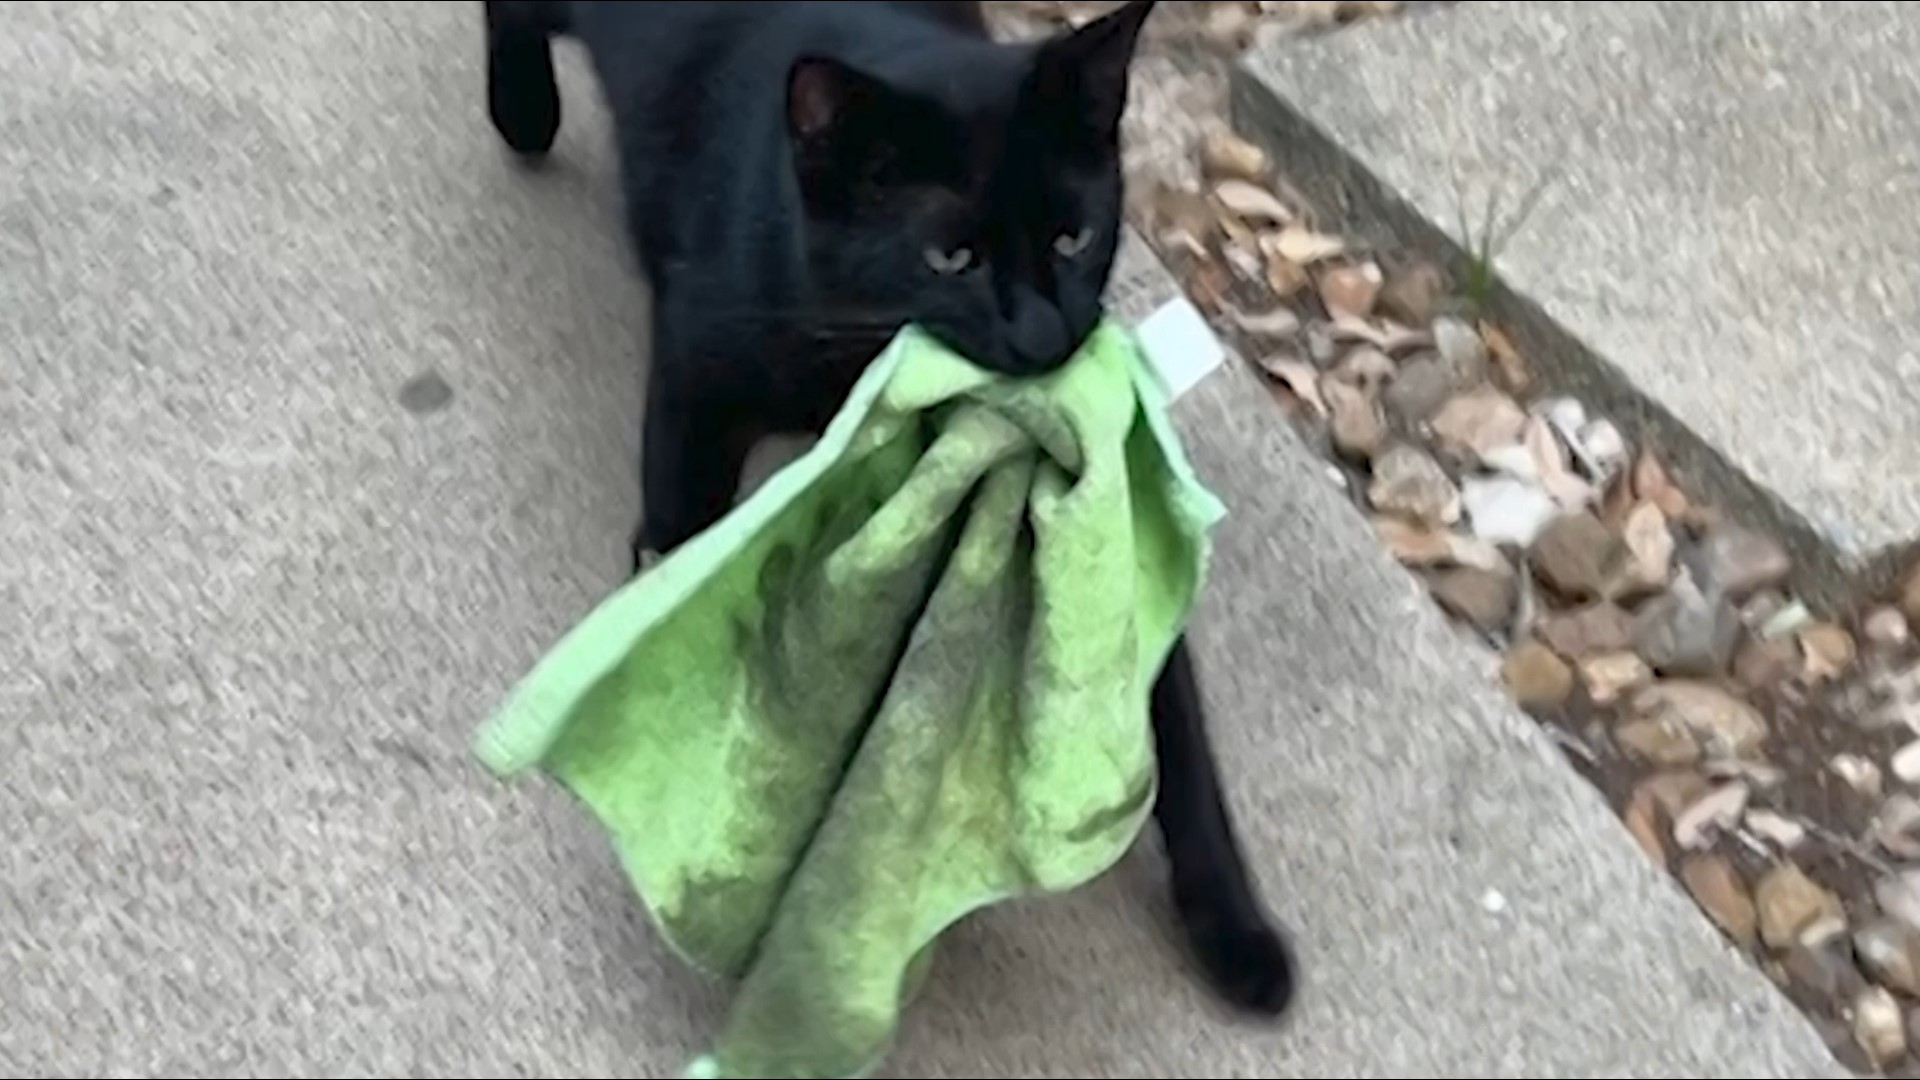 Cleo's owner says her four-legged companion has been stealing everything from socks, yard gloves, bathing suits, t-shirts -- anything it can get its hands on.